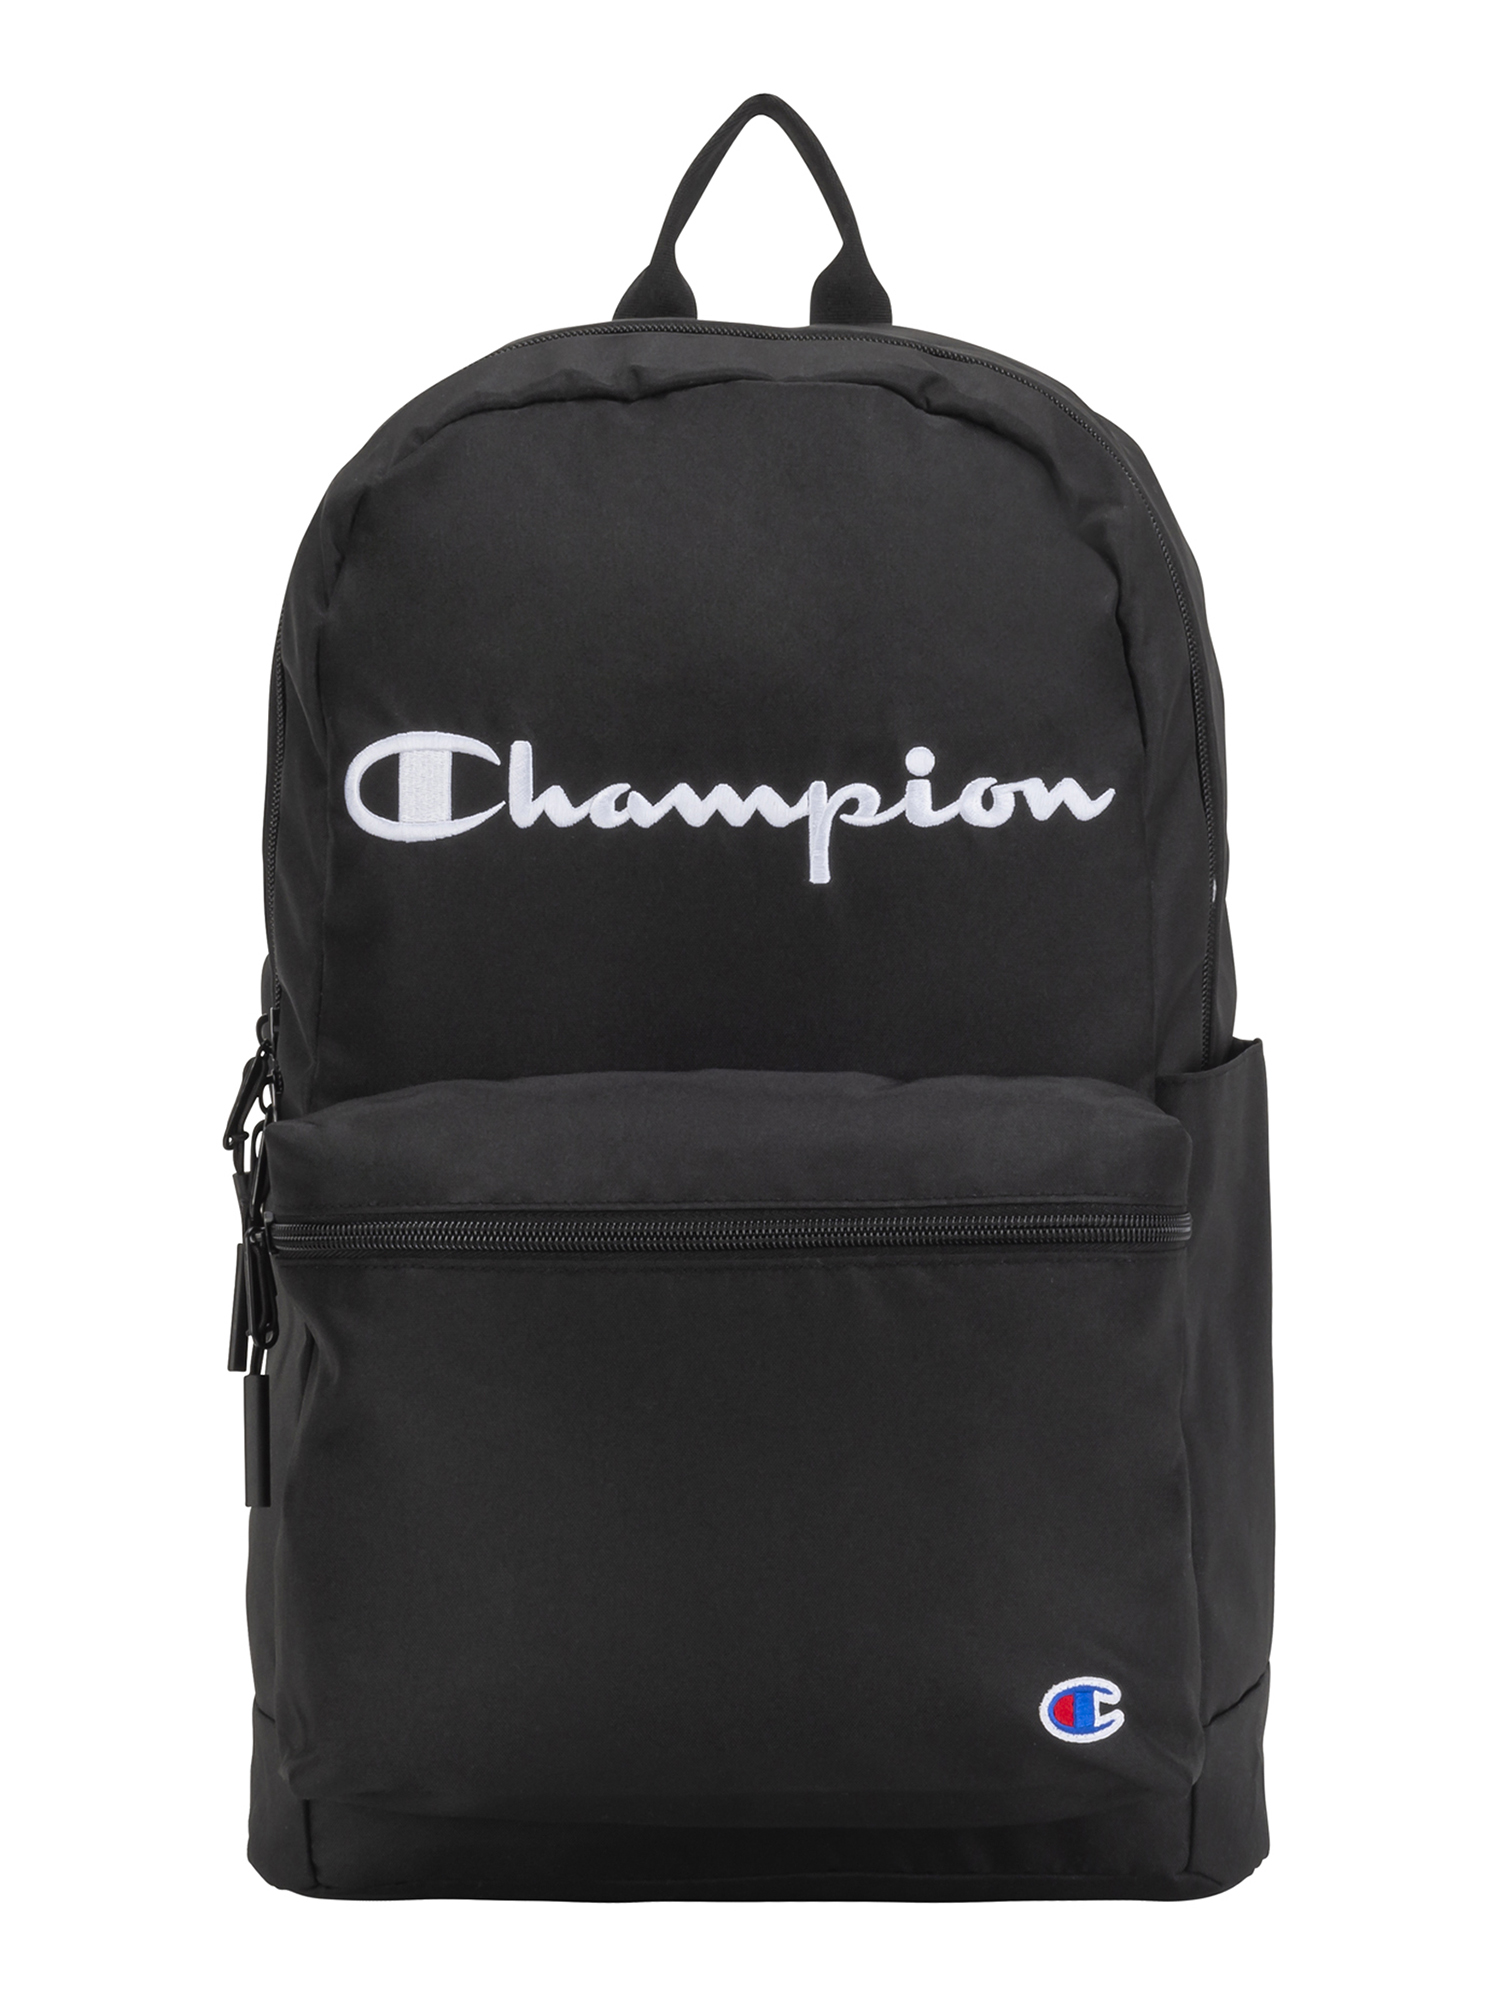 Champion Asher Backpack Deals, Coupons & Reviews